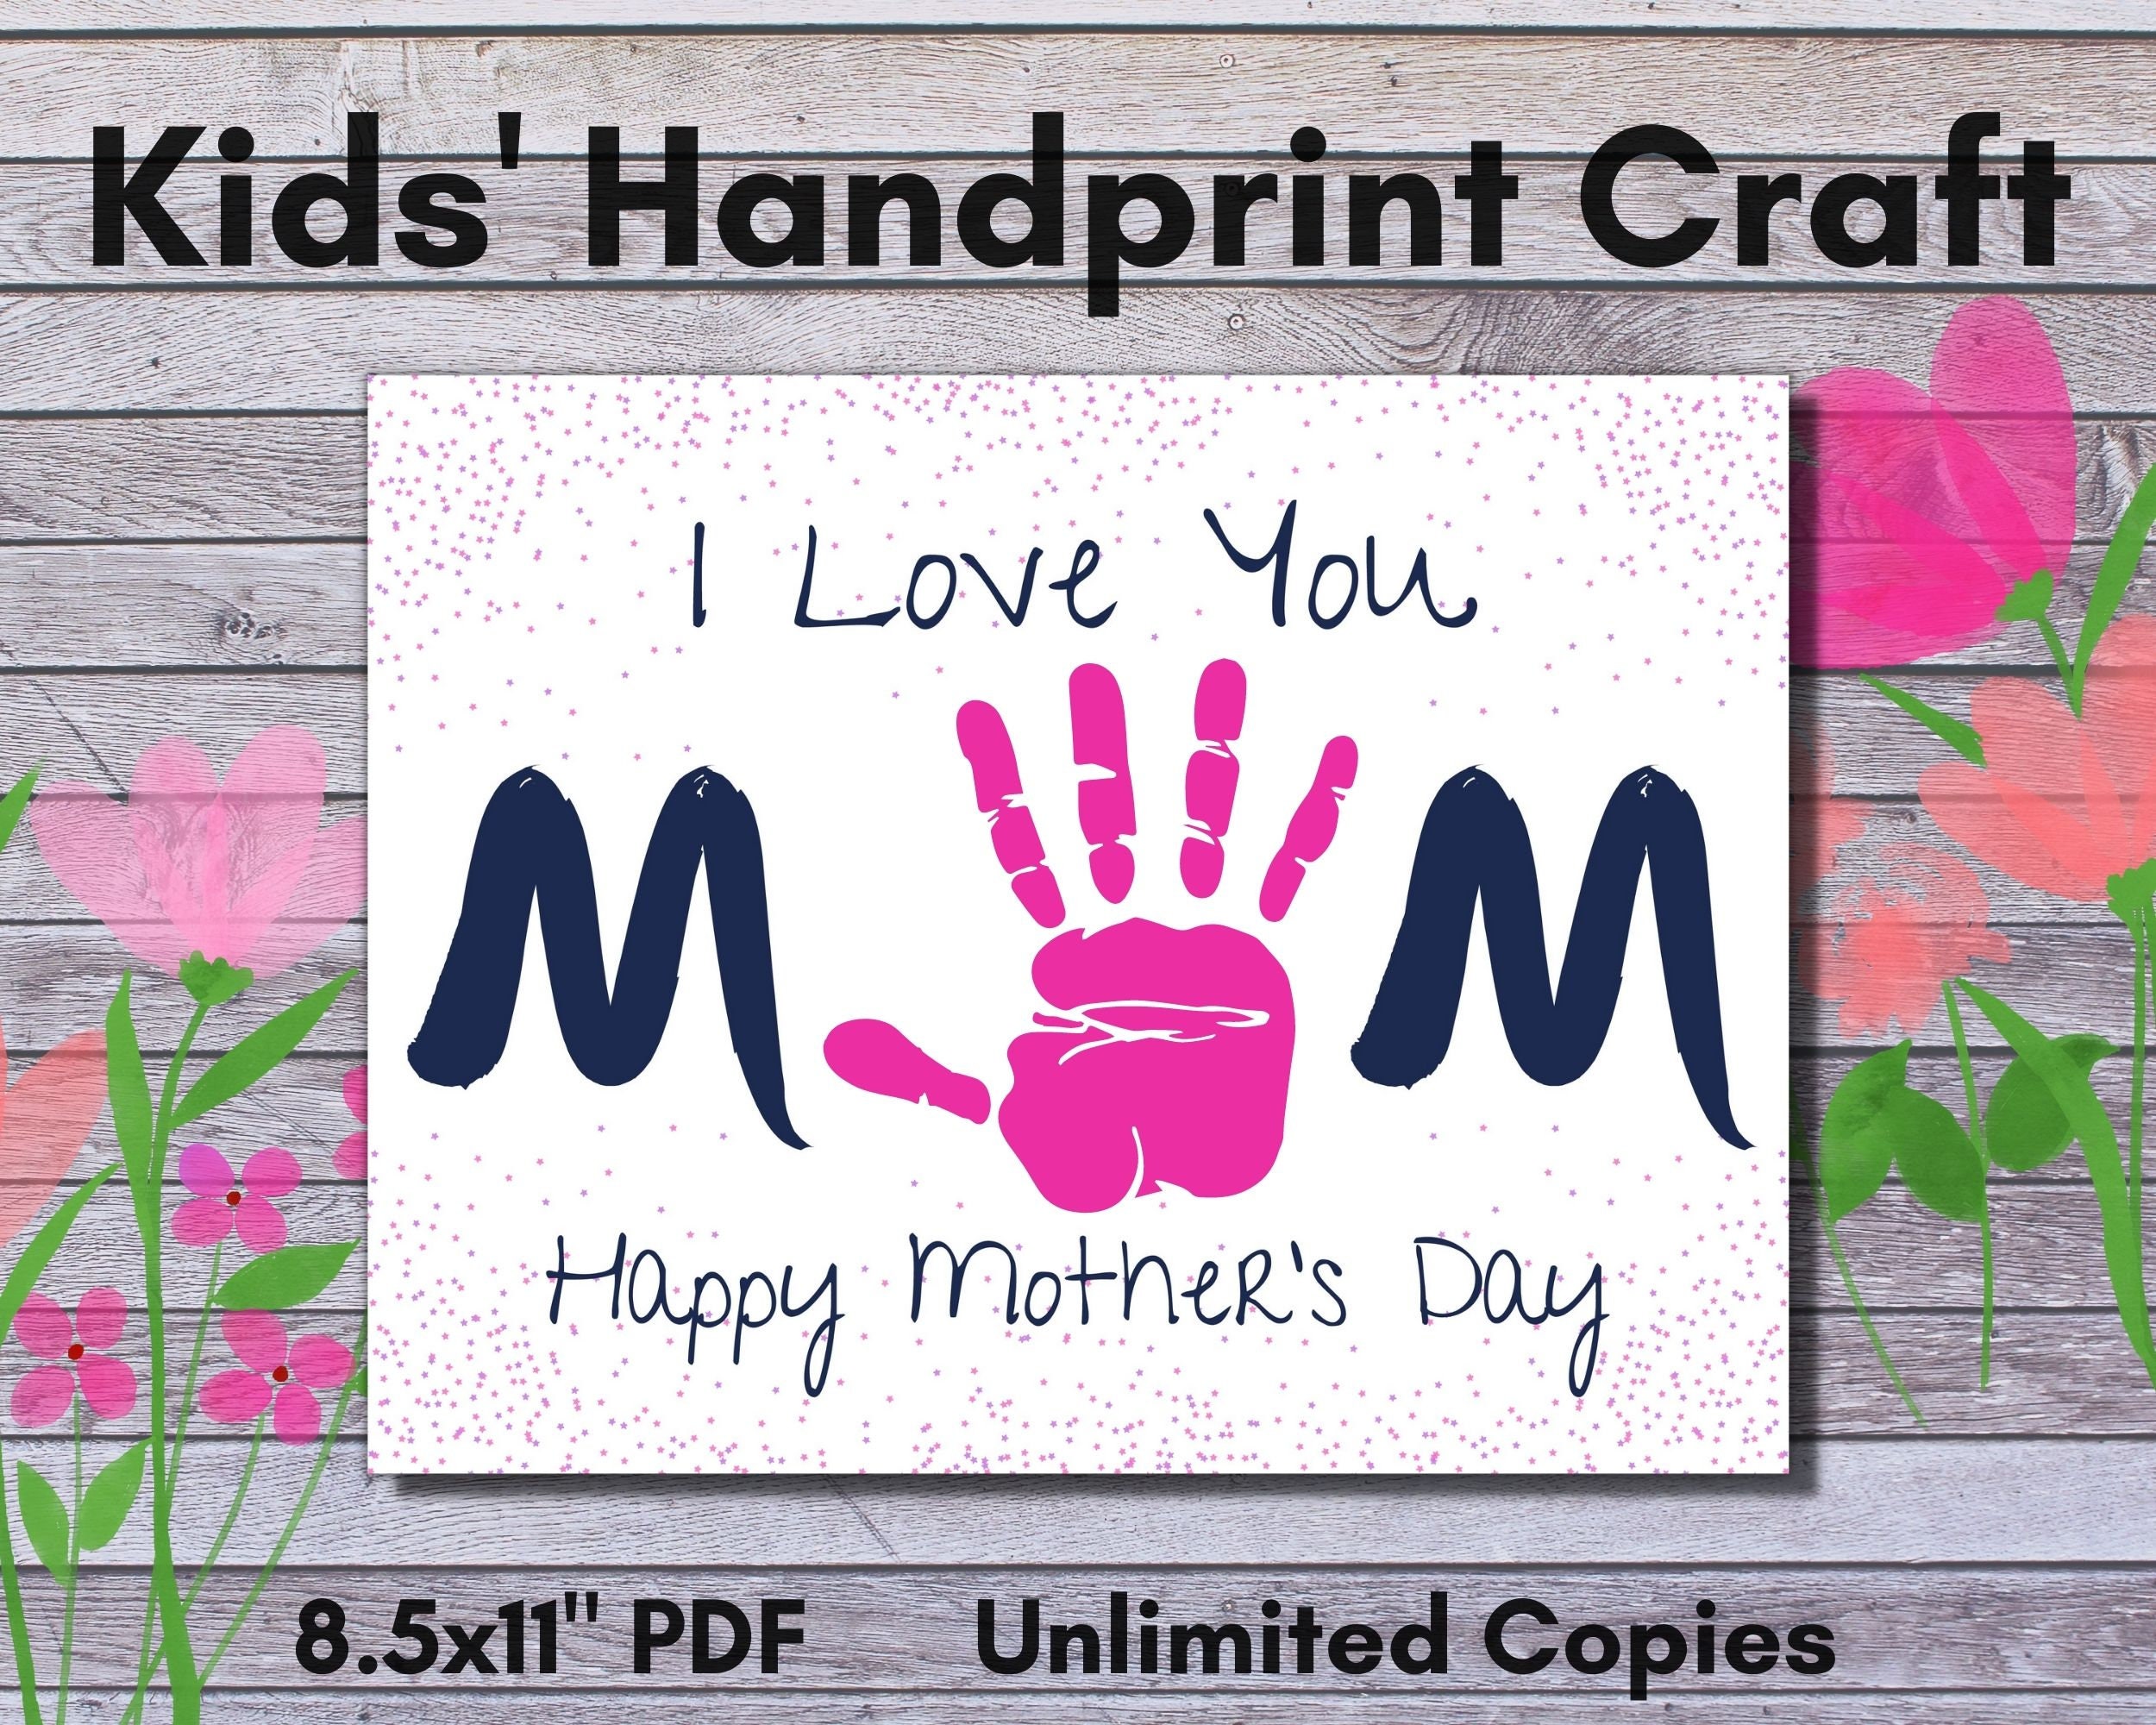 Personalized Mother's Day Craft Kit for Kids Children's Mother's